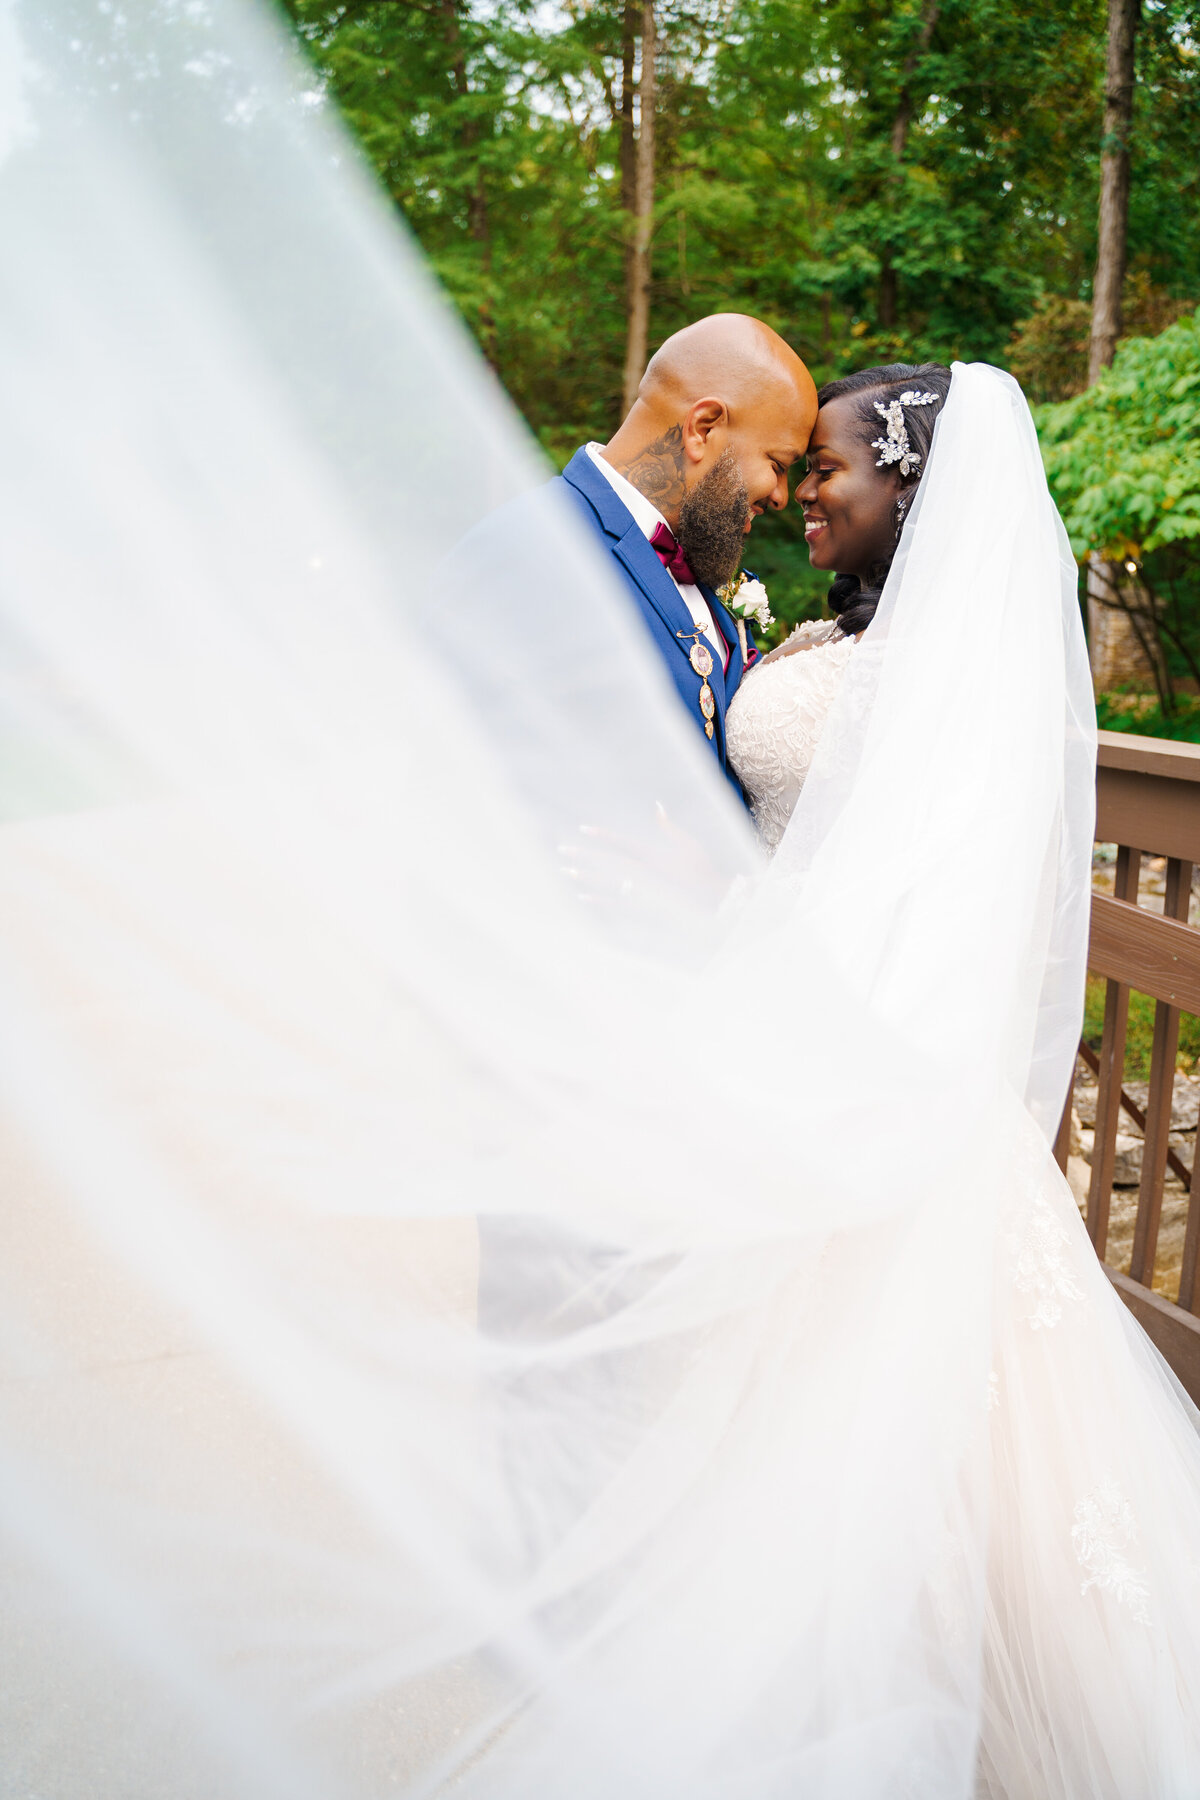 Bride and groom touch foreheads as the veil cascades into the camera at their wedding at the Wigwam Event Center in Pickerington, Ohio.